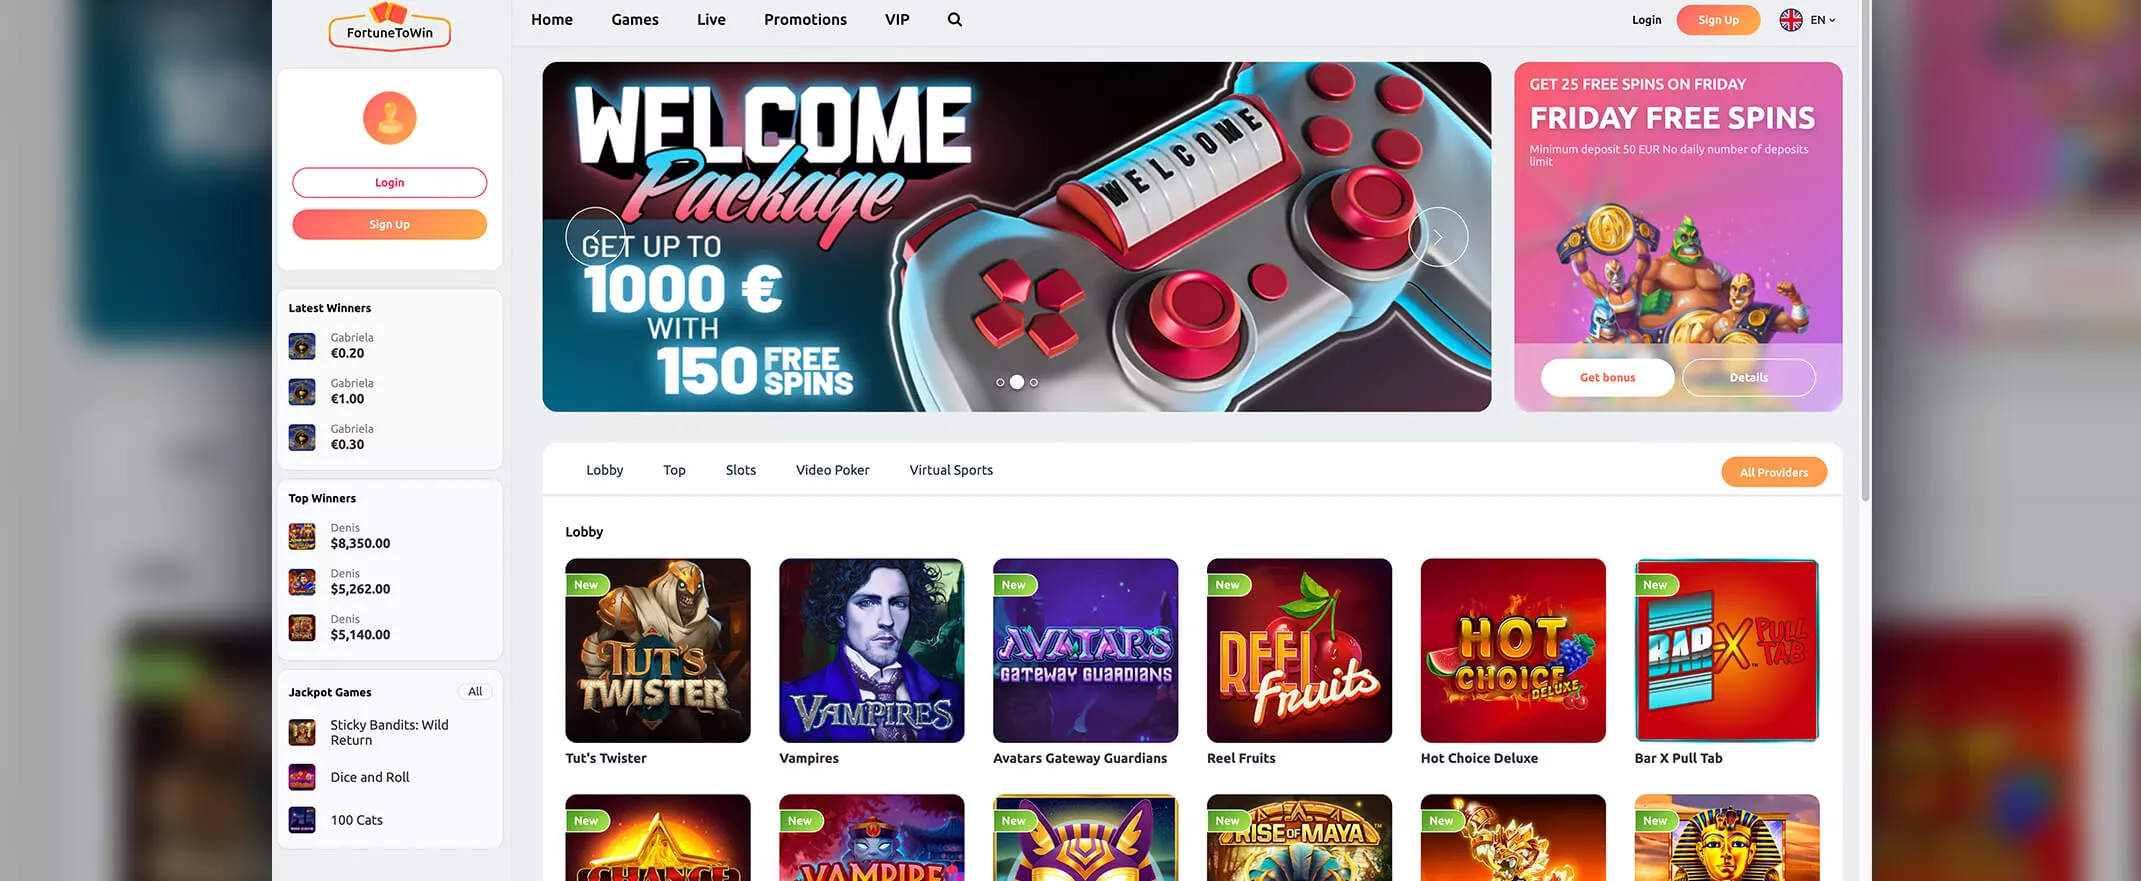 Fortune to Win screenshot of the homepage